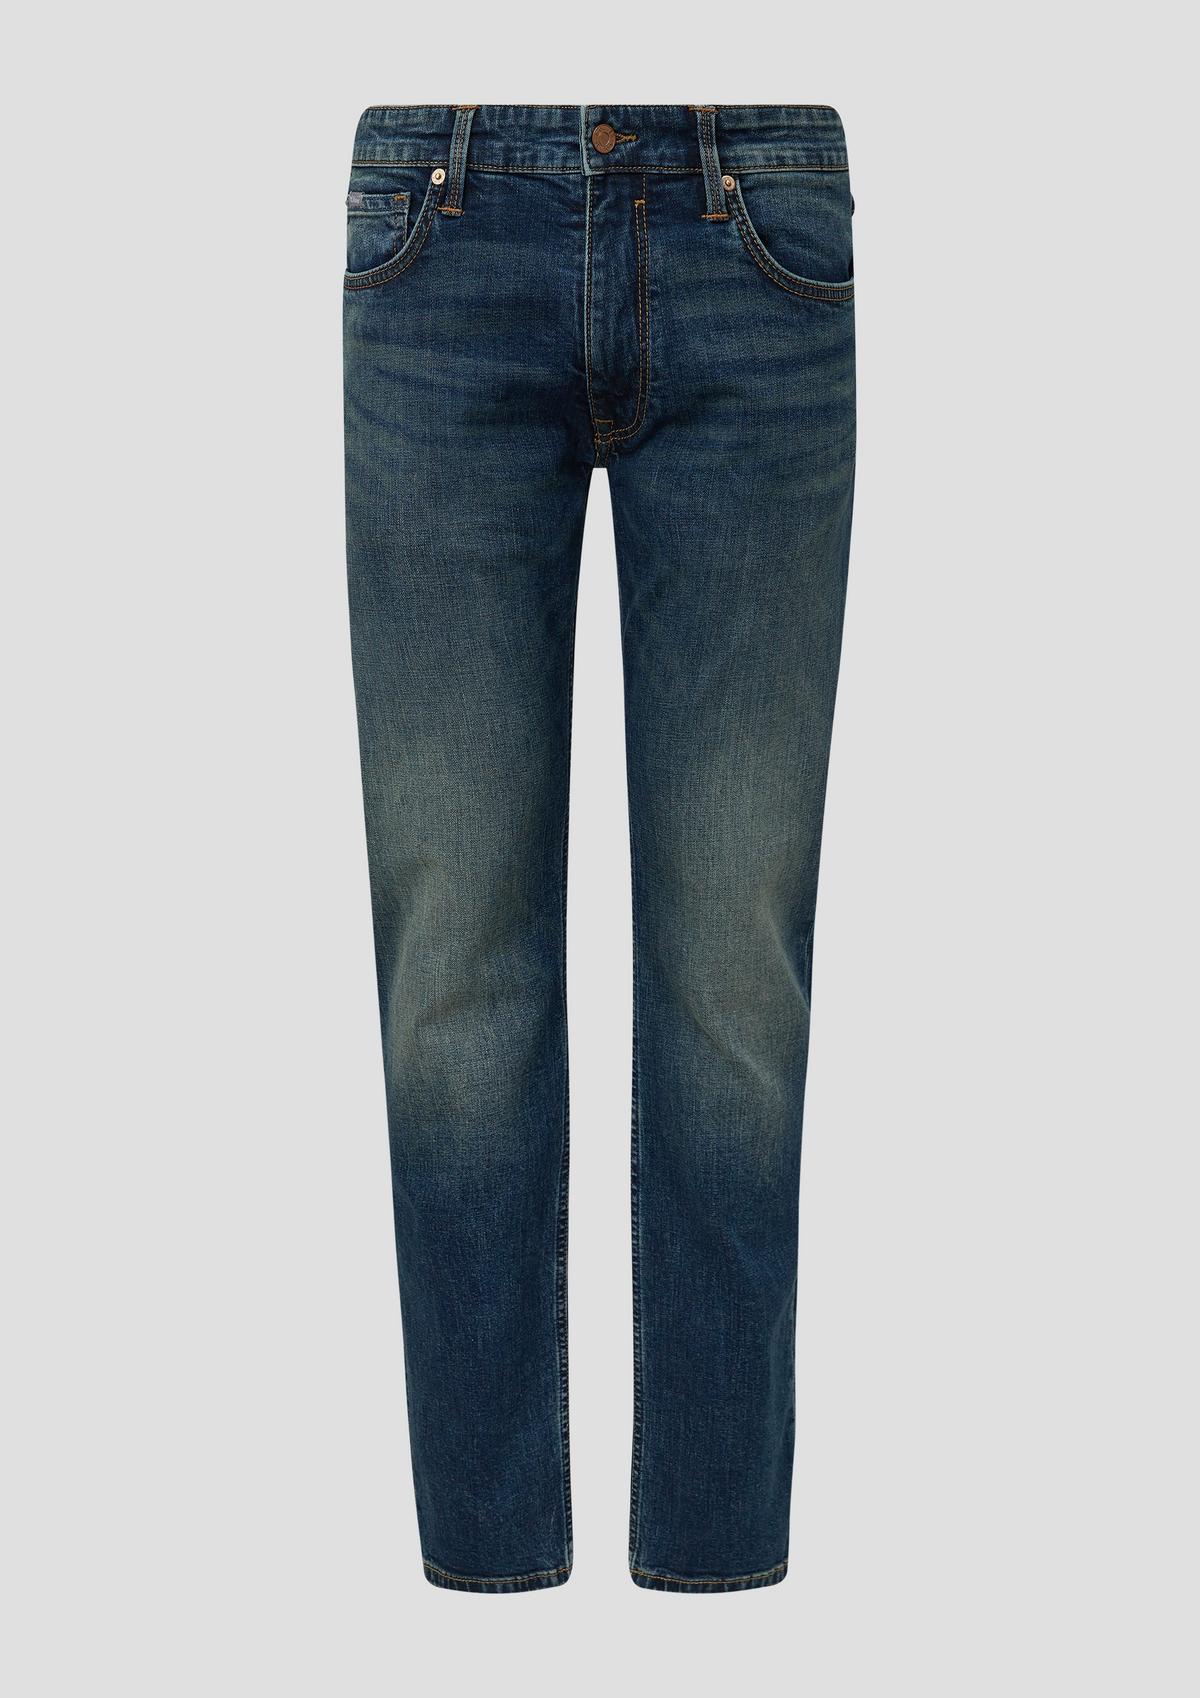 s.Oliver Jeans Keith / Slim Fit / Mid Rise / Straight Leg